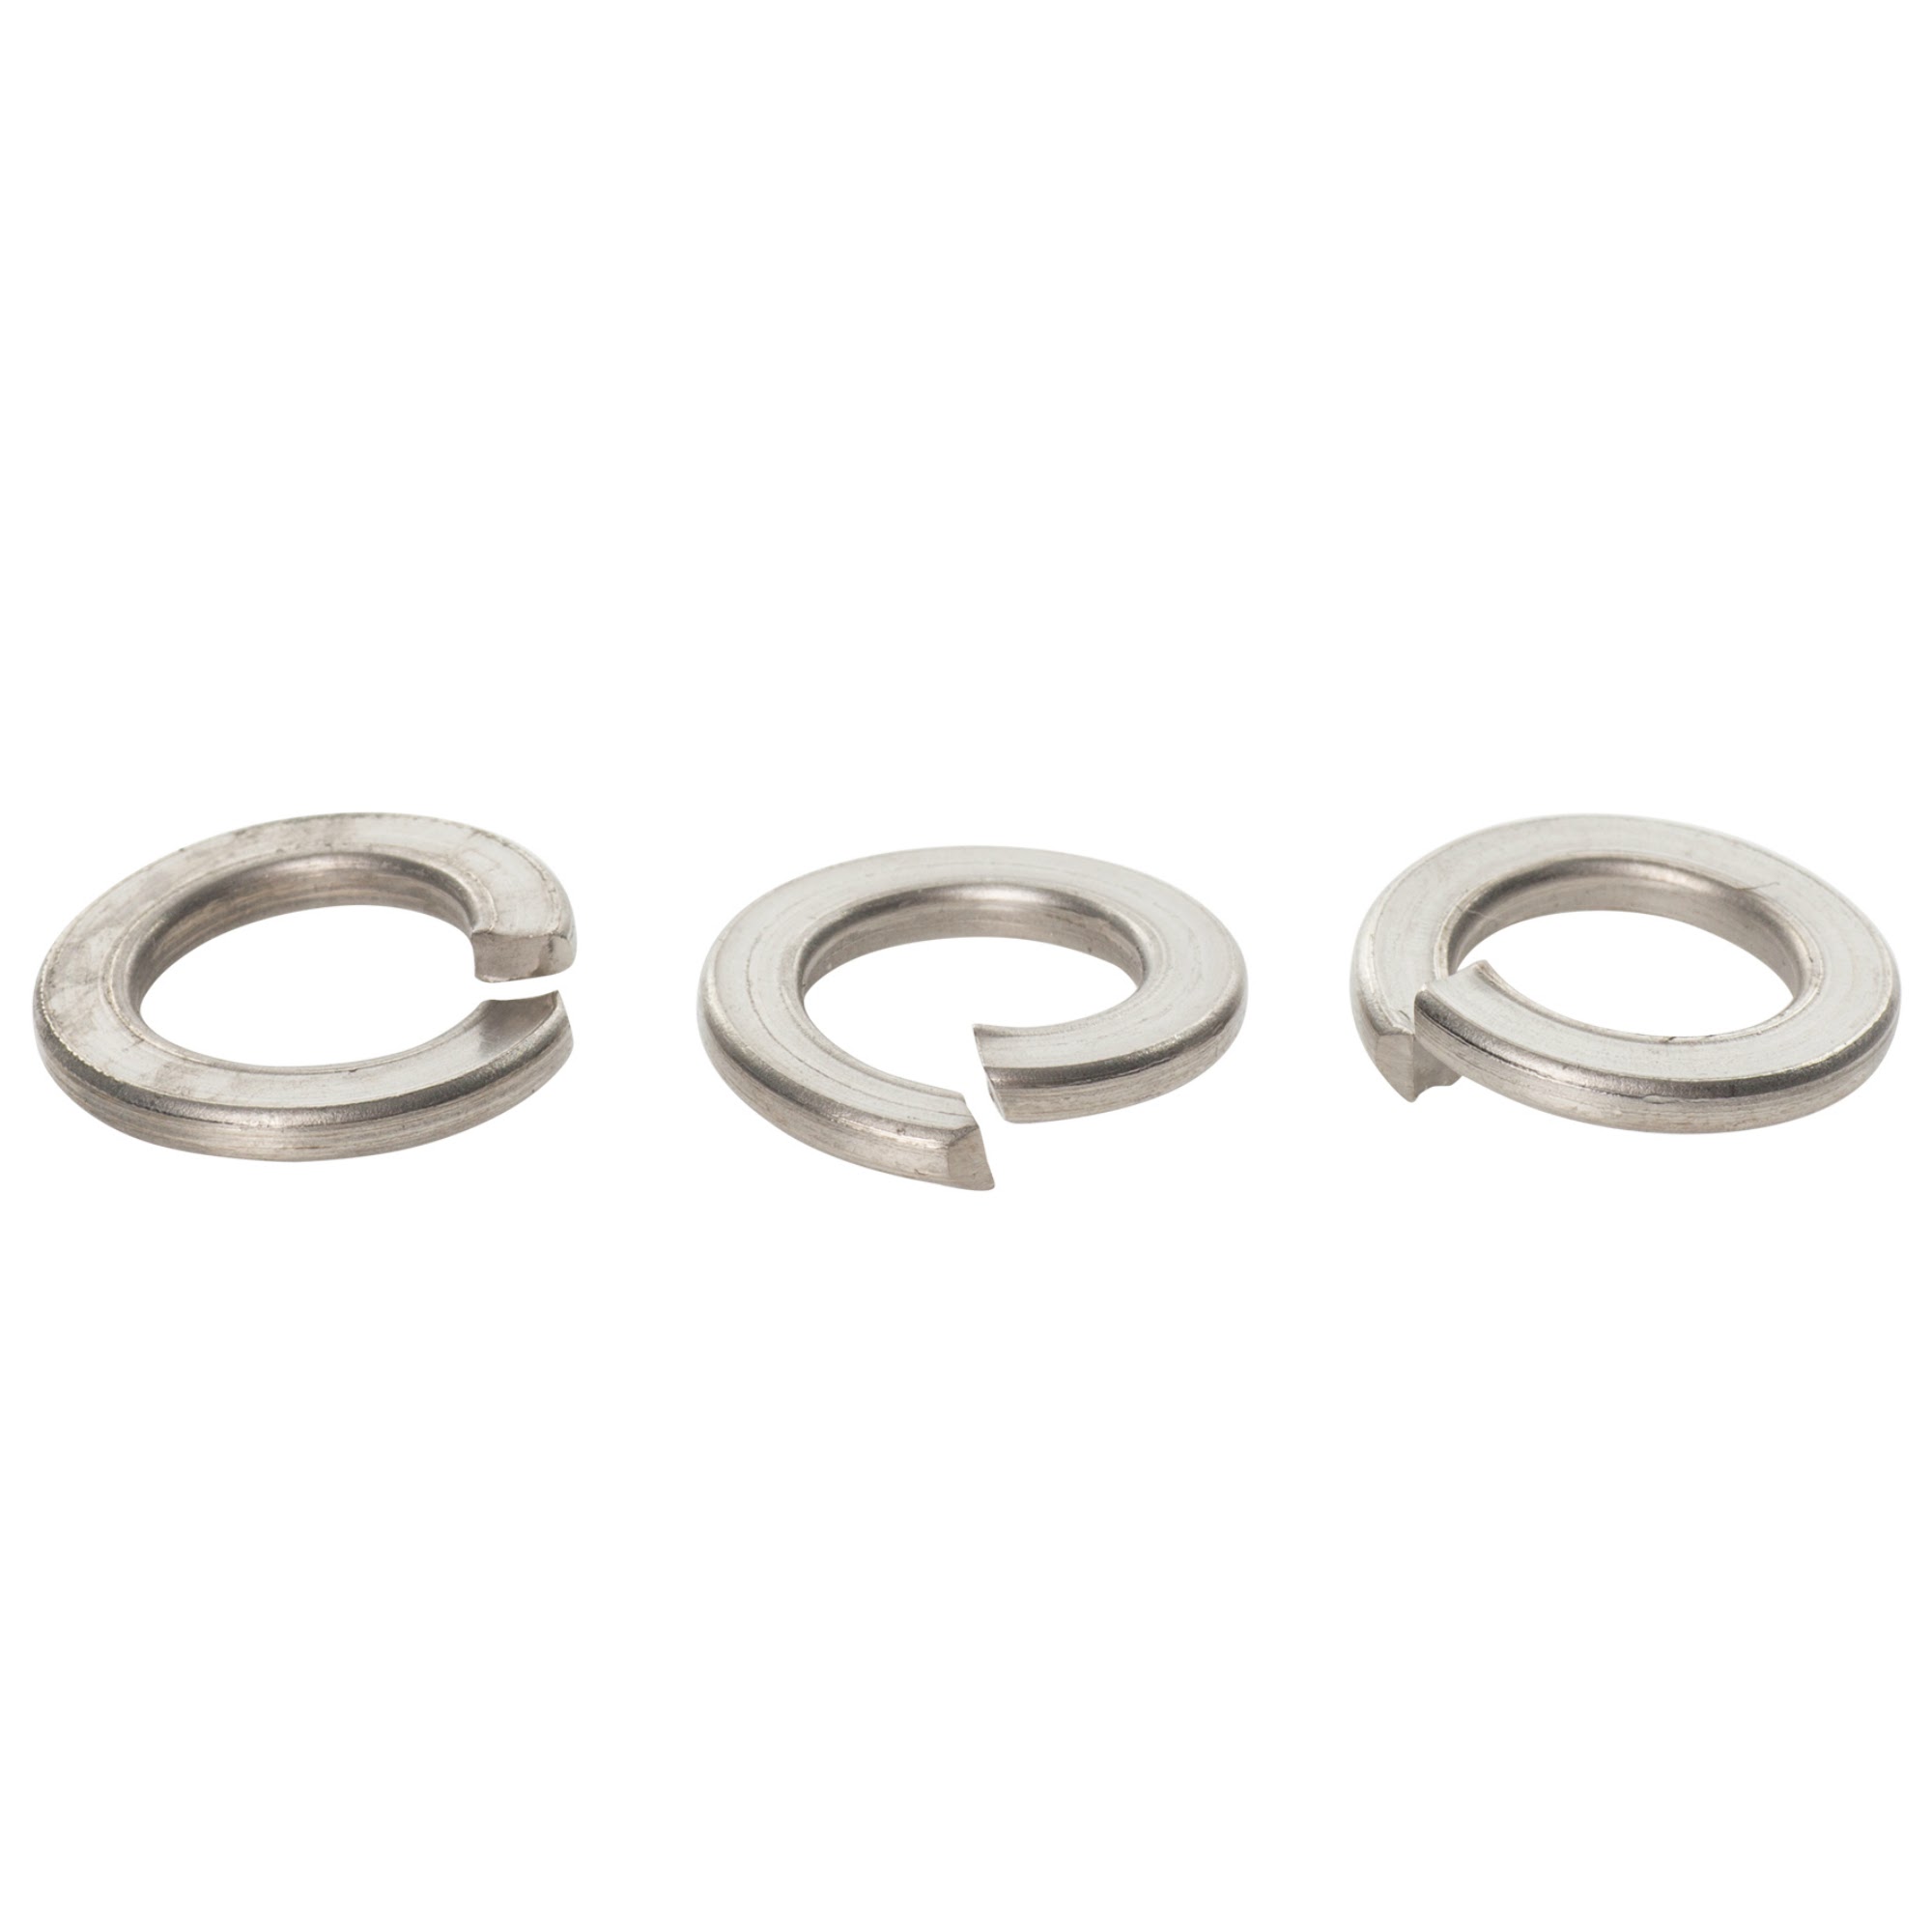 20 PACK M2 M2.5 M3 M4 M5 M6 M8 M10 M12 STAINLESS SQUARE SECTION SPRING WASHERS